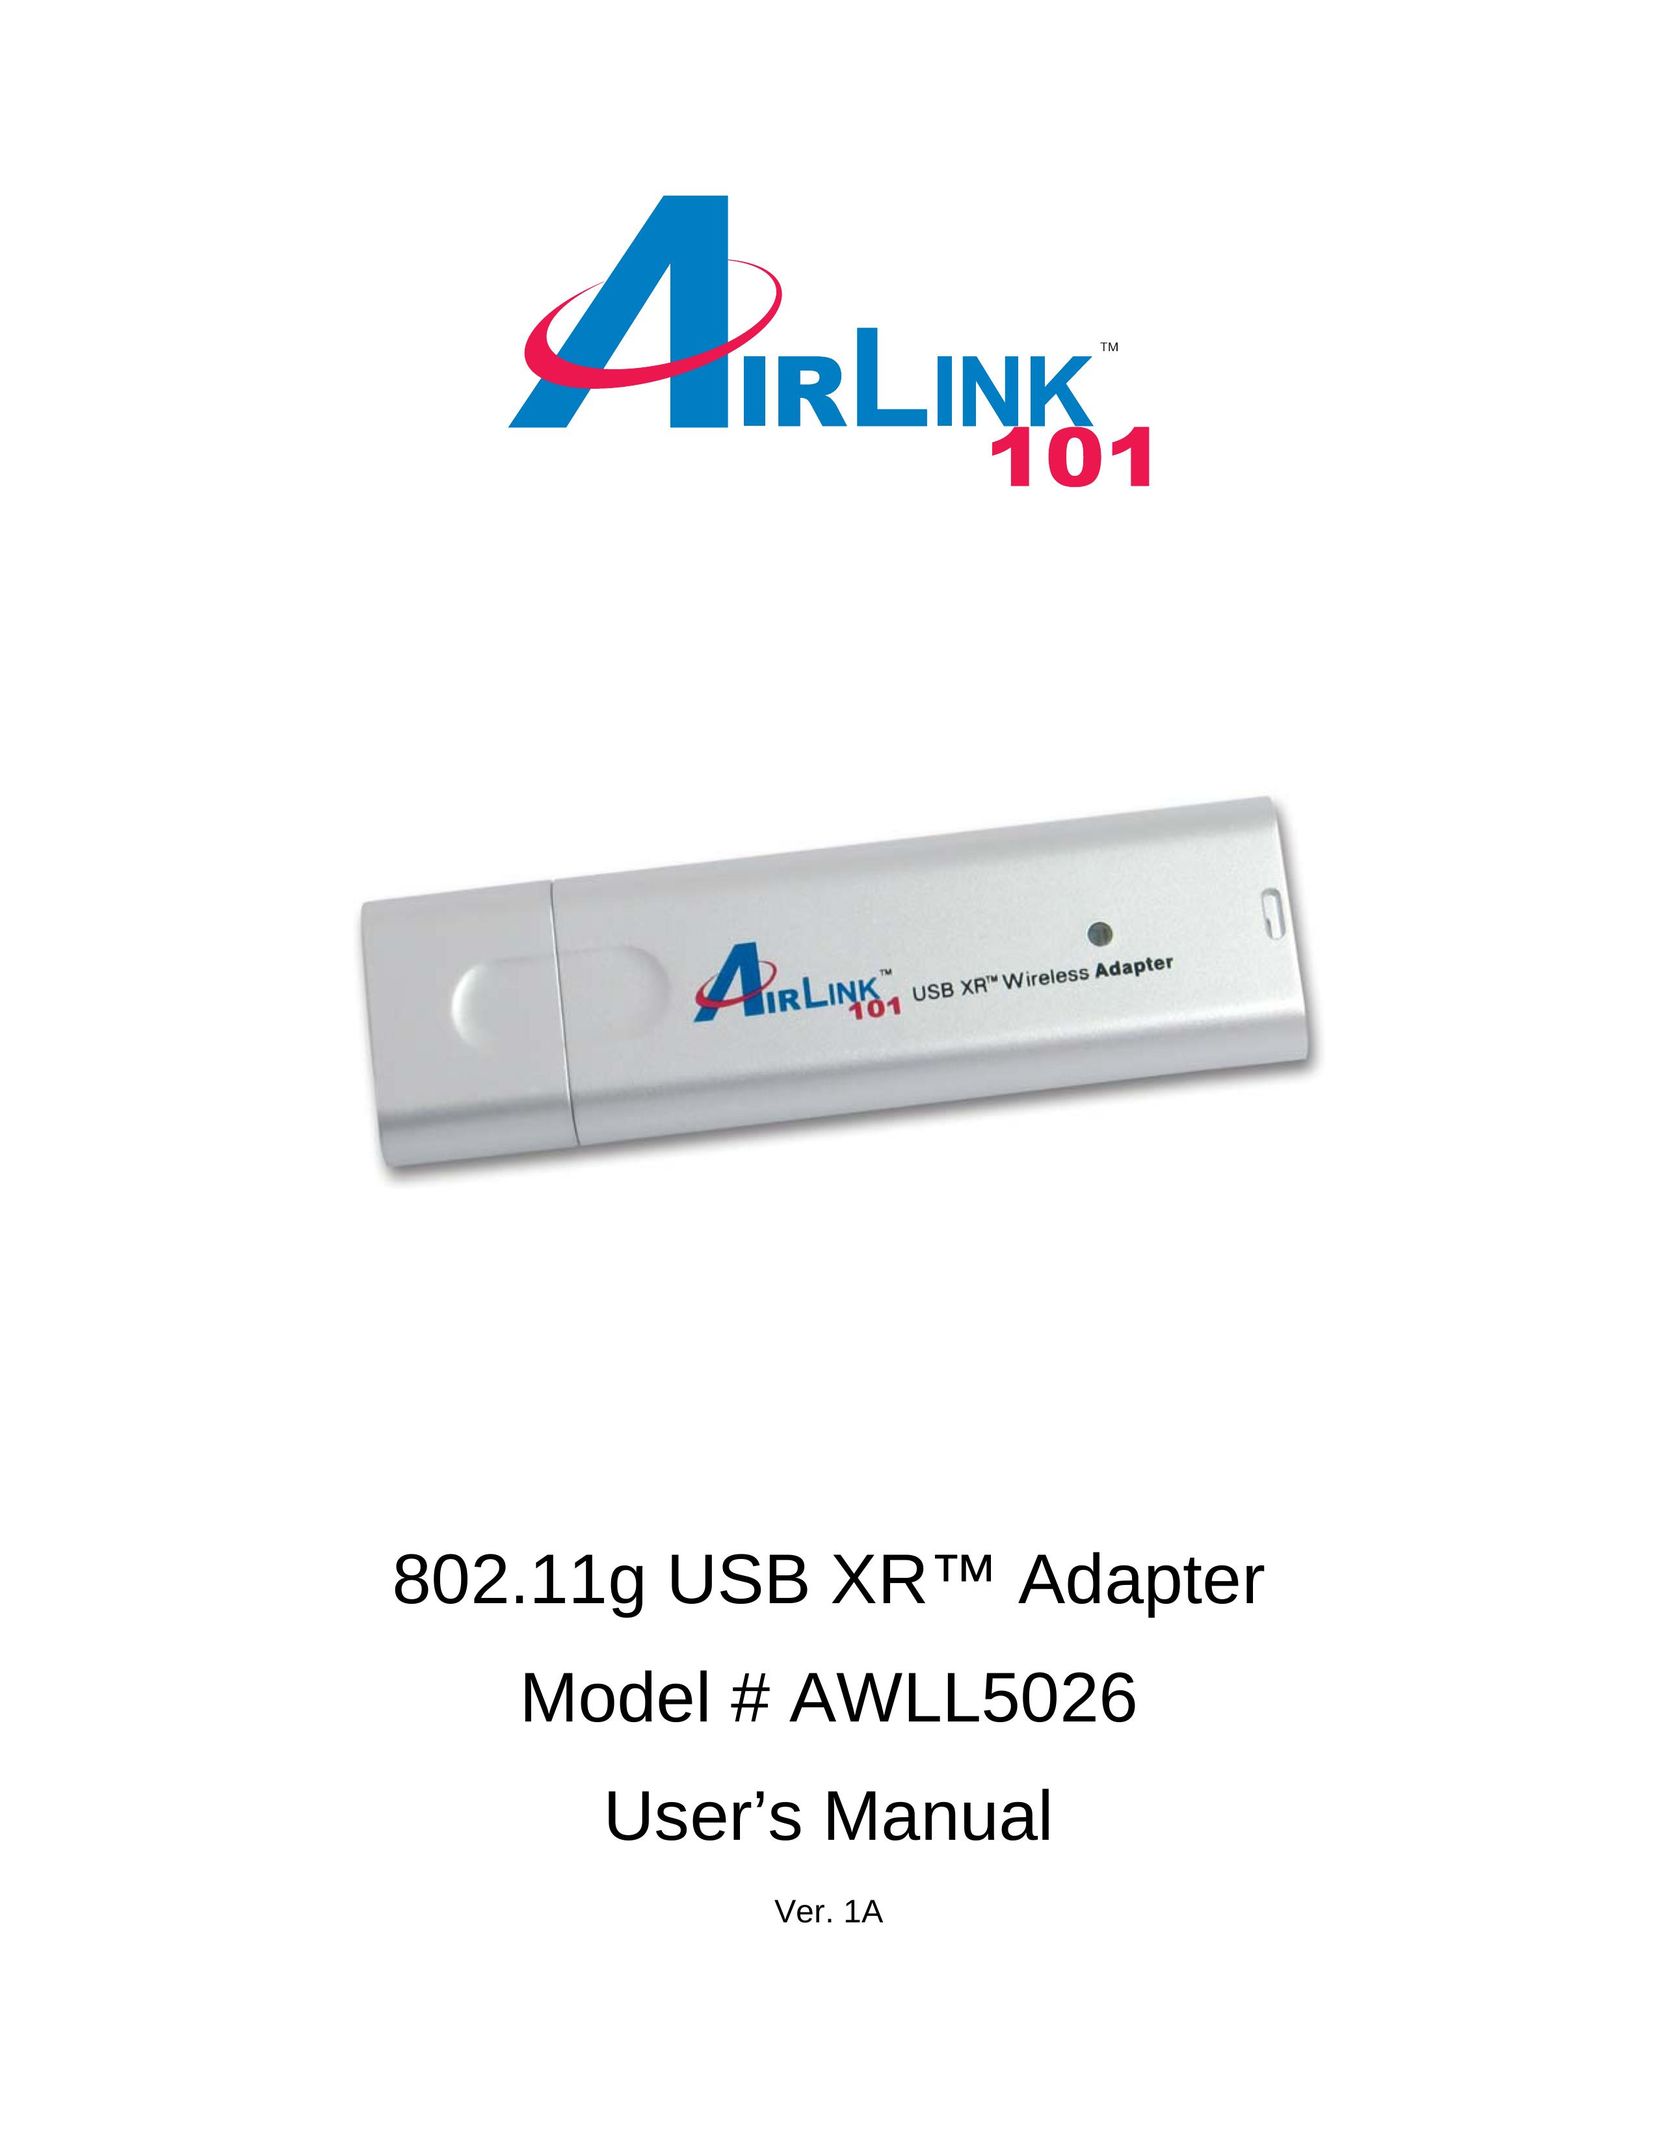 Airlink101 AWLL5026 Network Card User Manual